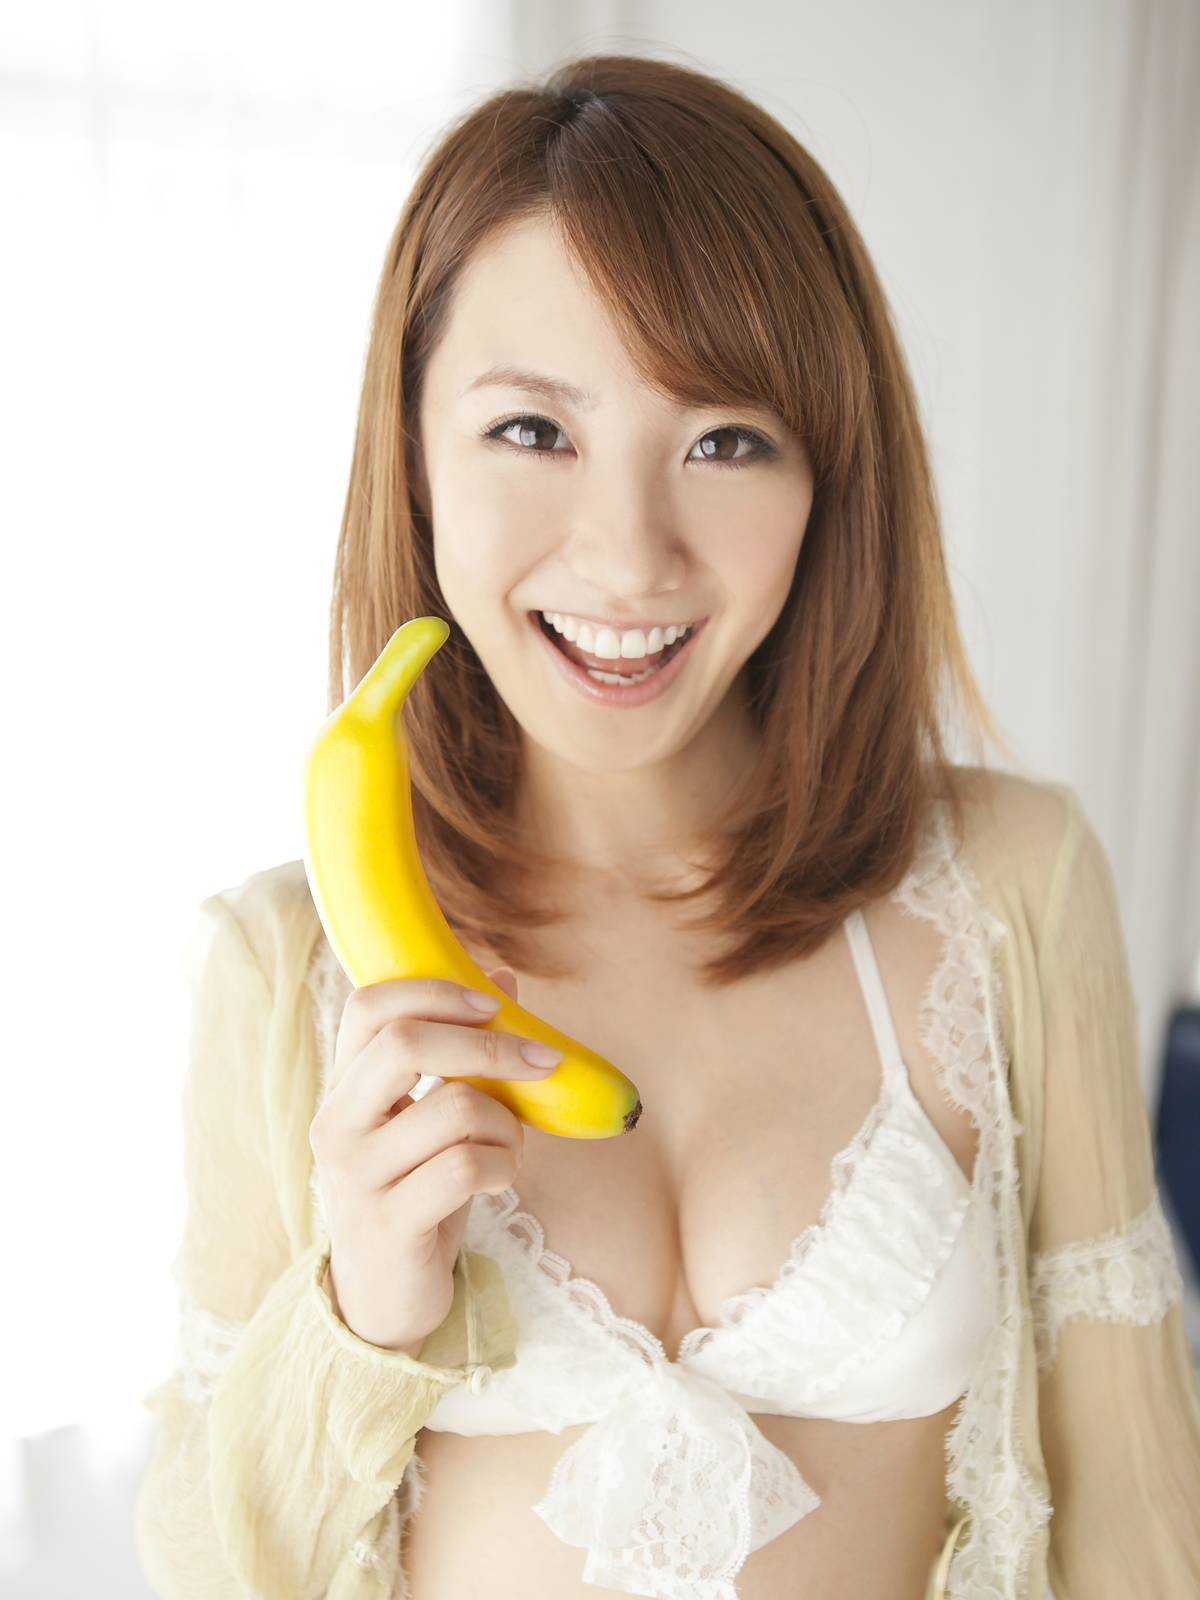 Yamamoto juicy frit [st] Japan sexy beauty picture package download